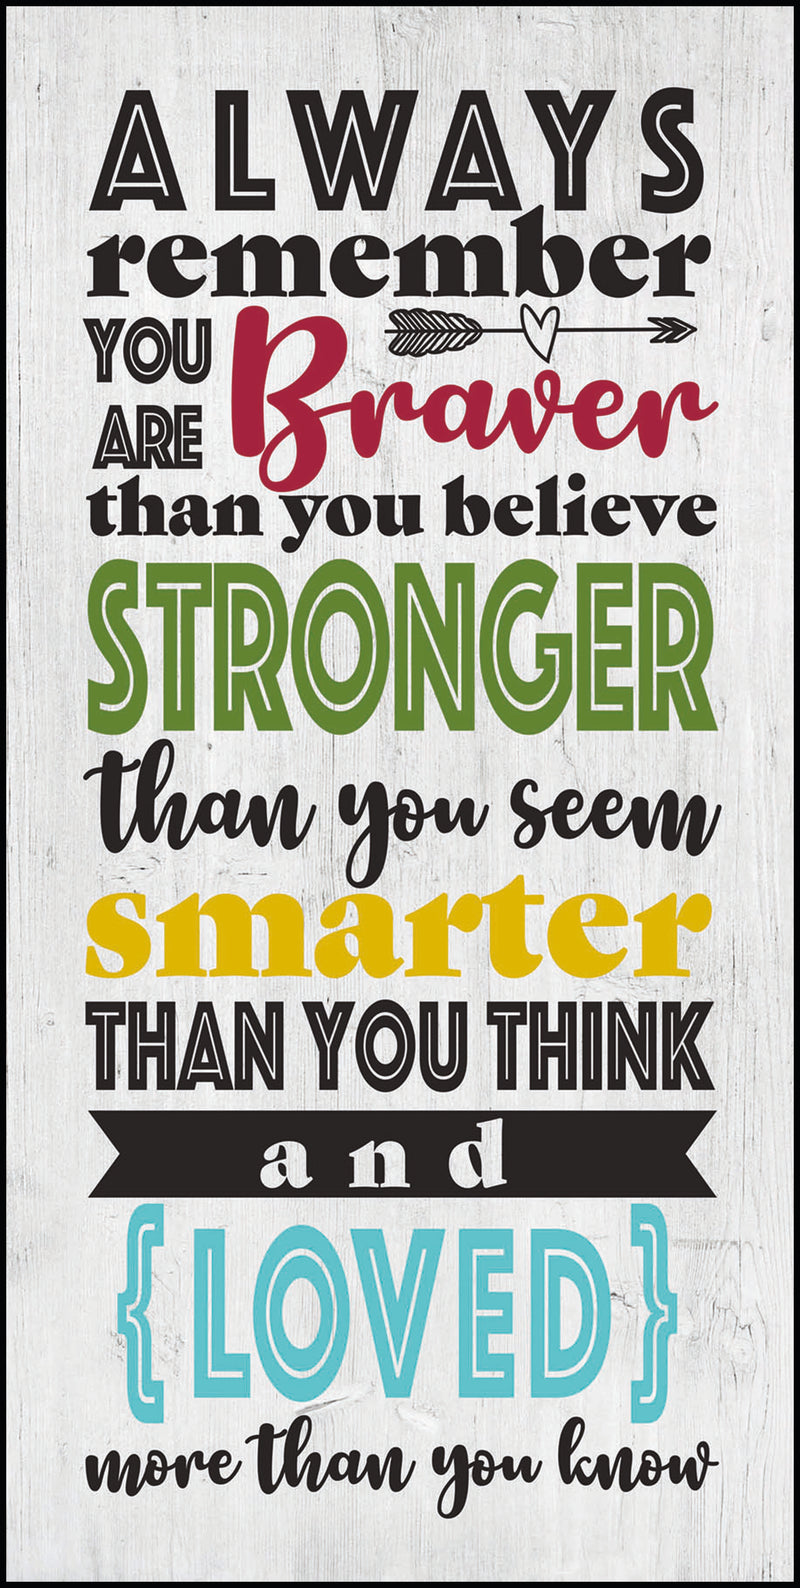 18 x 9 inch plaque "Always Remember you are Braver than you believe..."